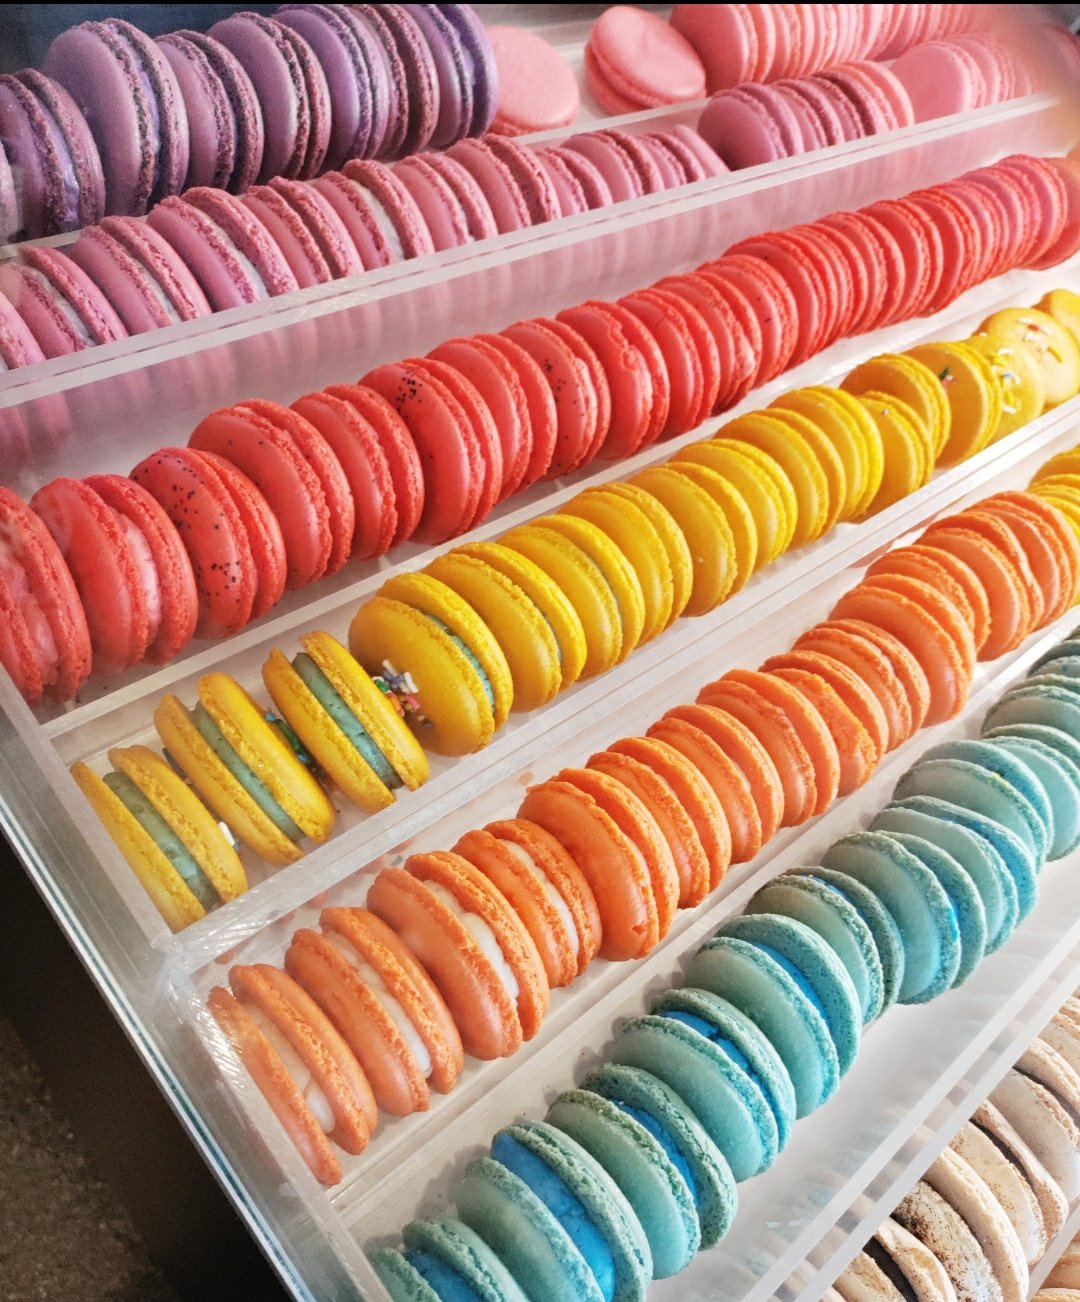 Colorful macarons from La Patisserie on The Pillow Goddess blog!